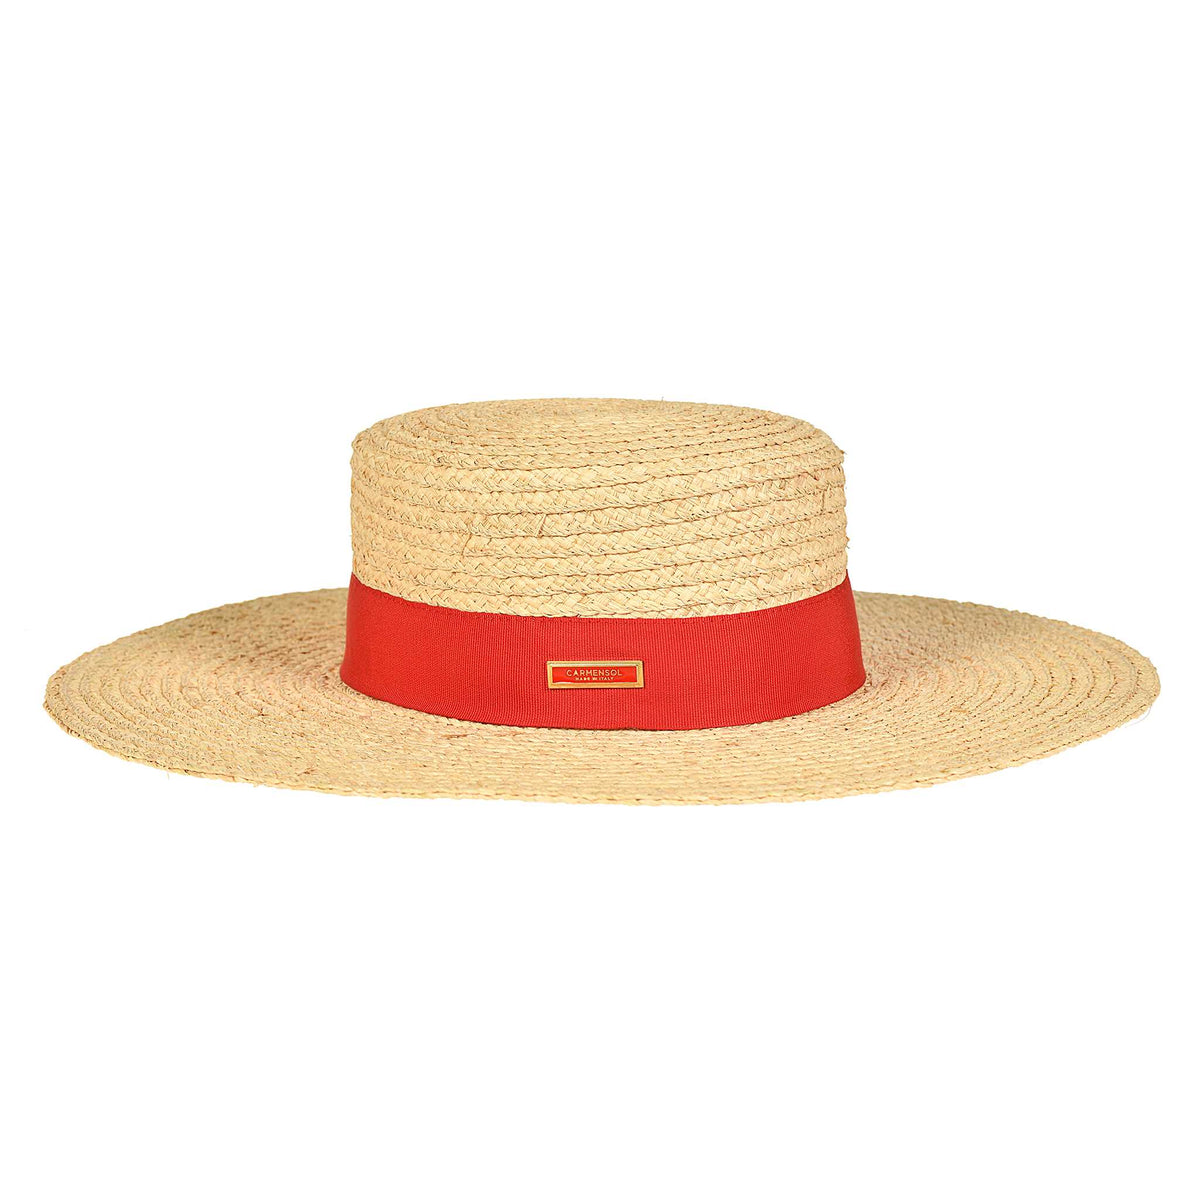 Handcrafted Mirtha raffia wide brim sun hat from Carmen Sol in color red